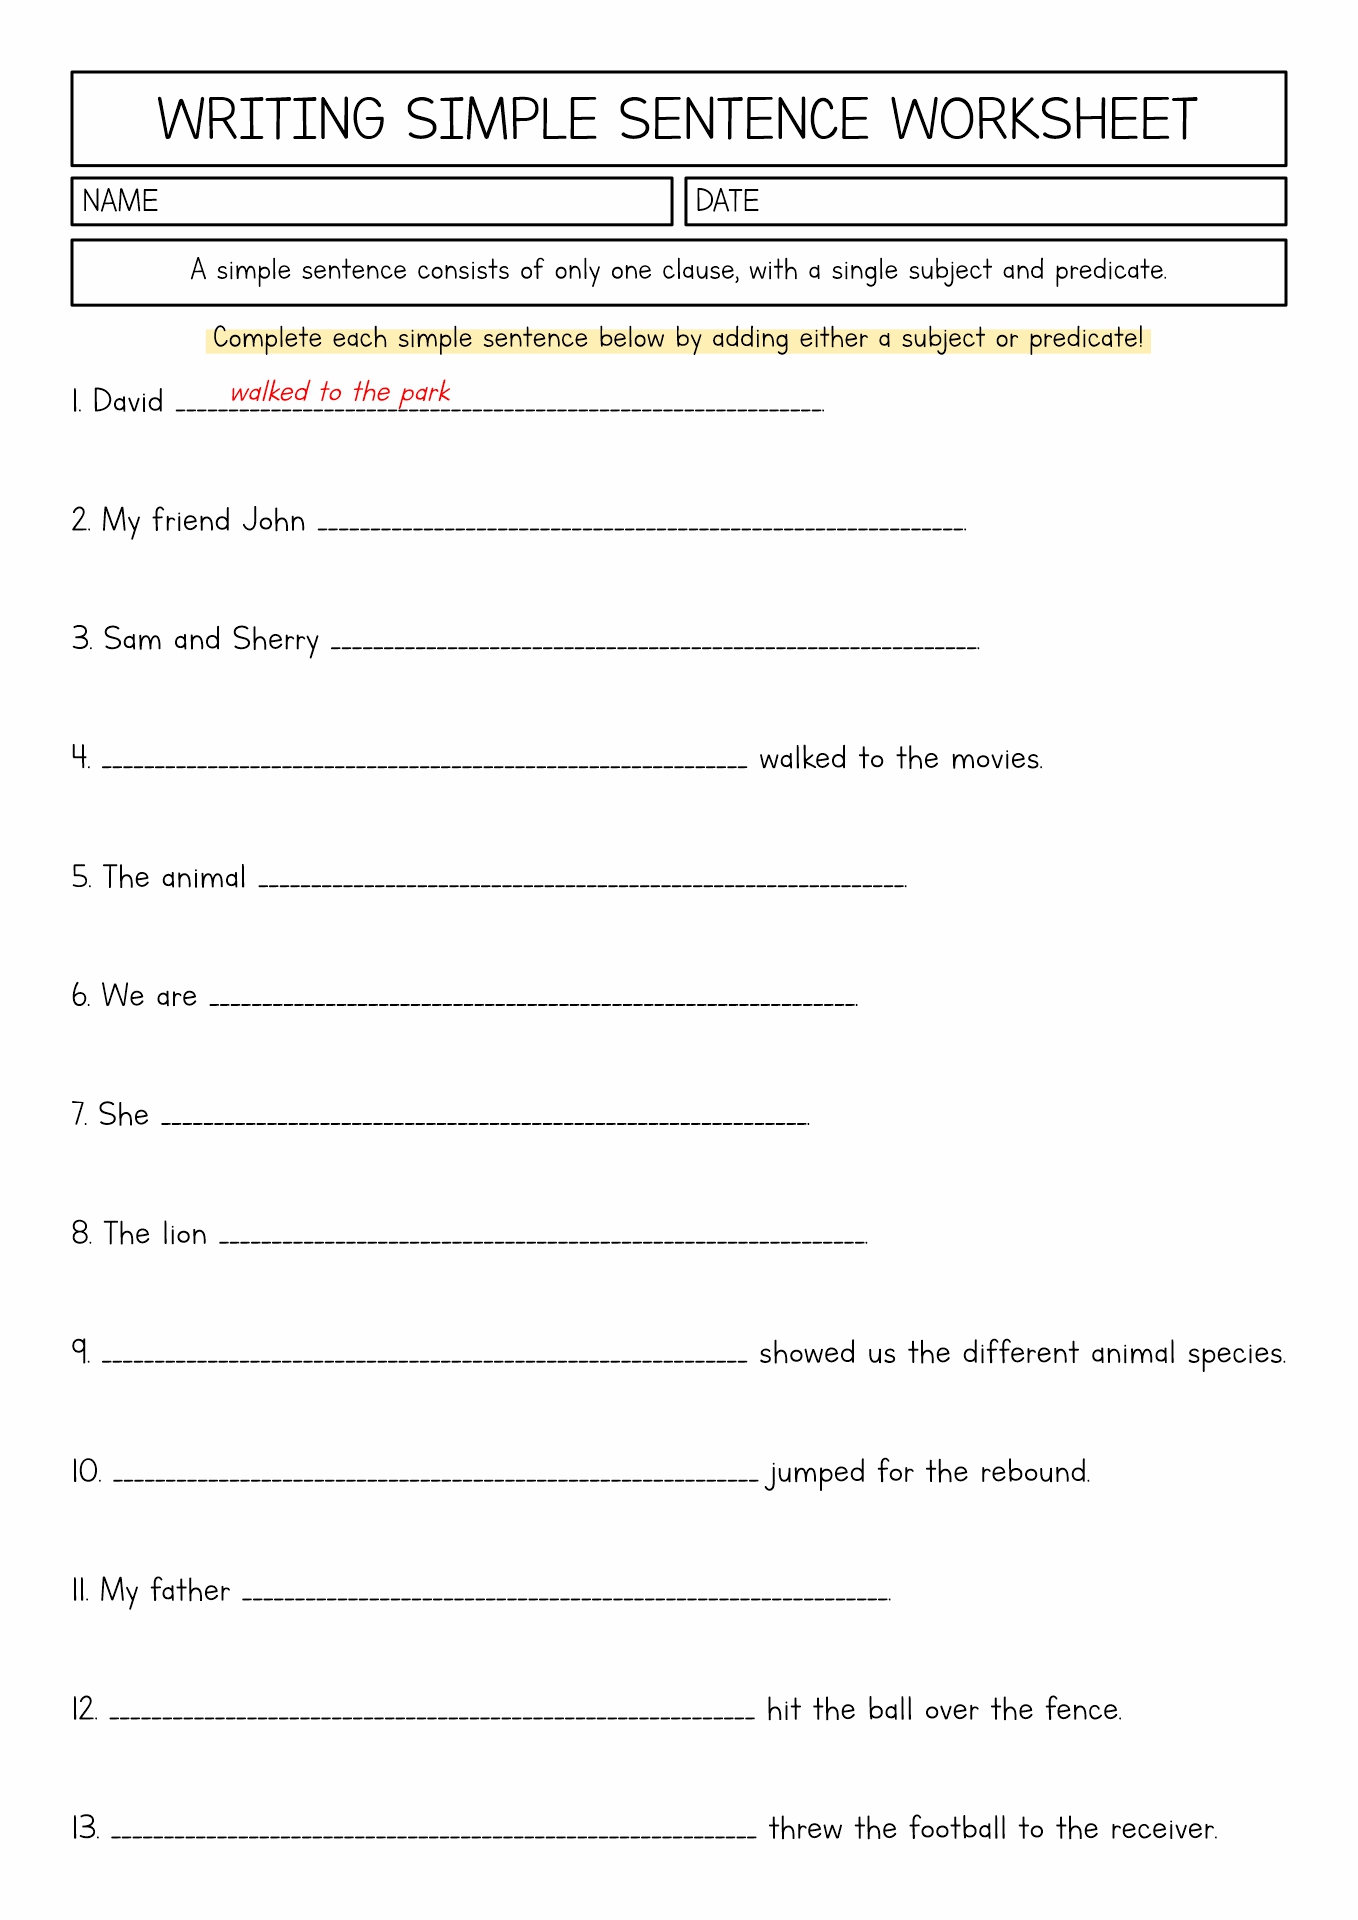 Writing Complete Sentences Worksheets 4th Grade